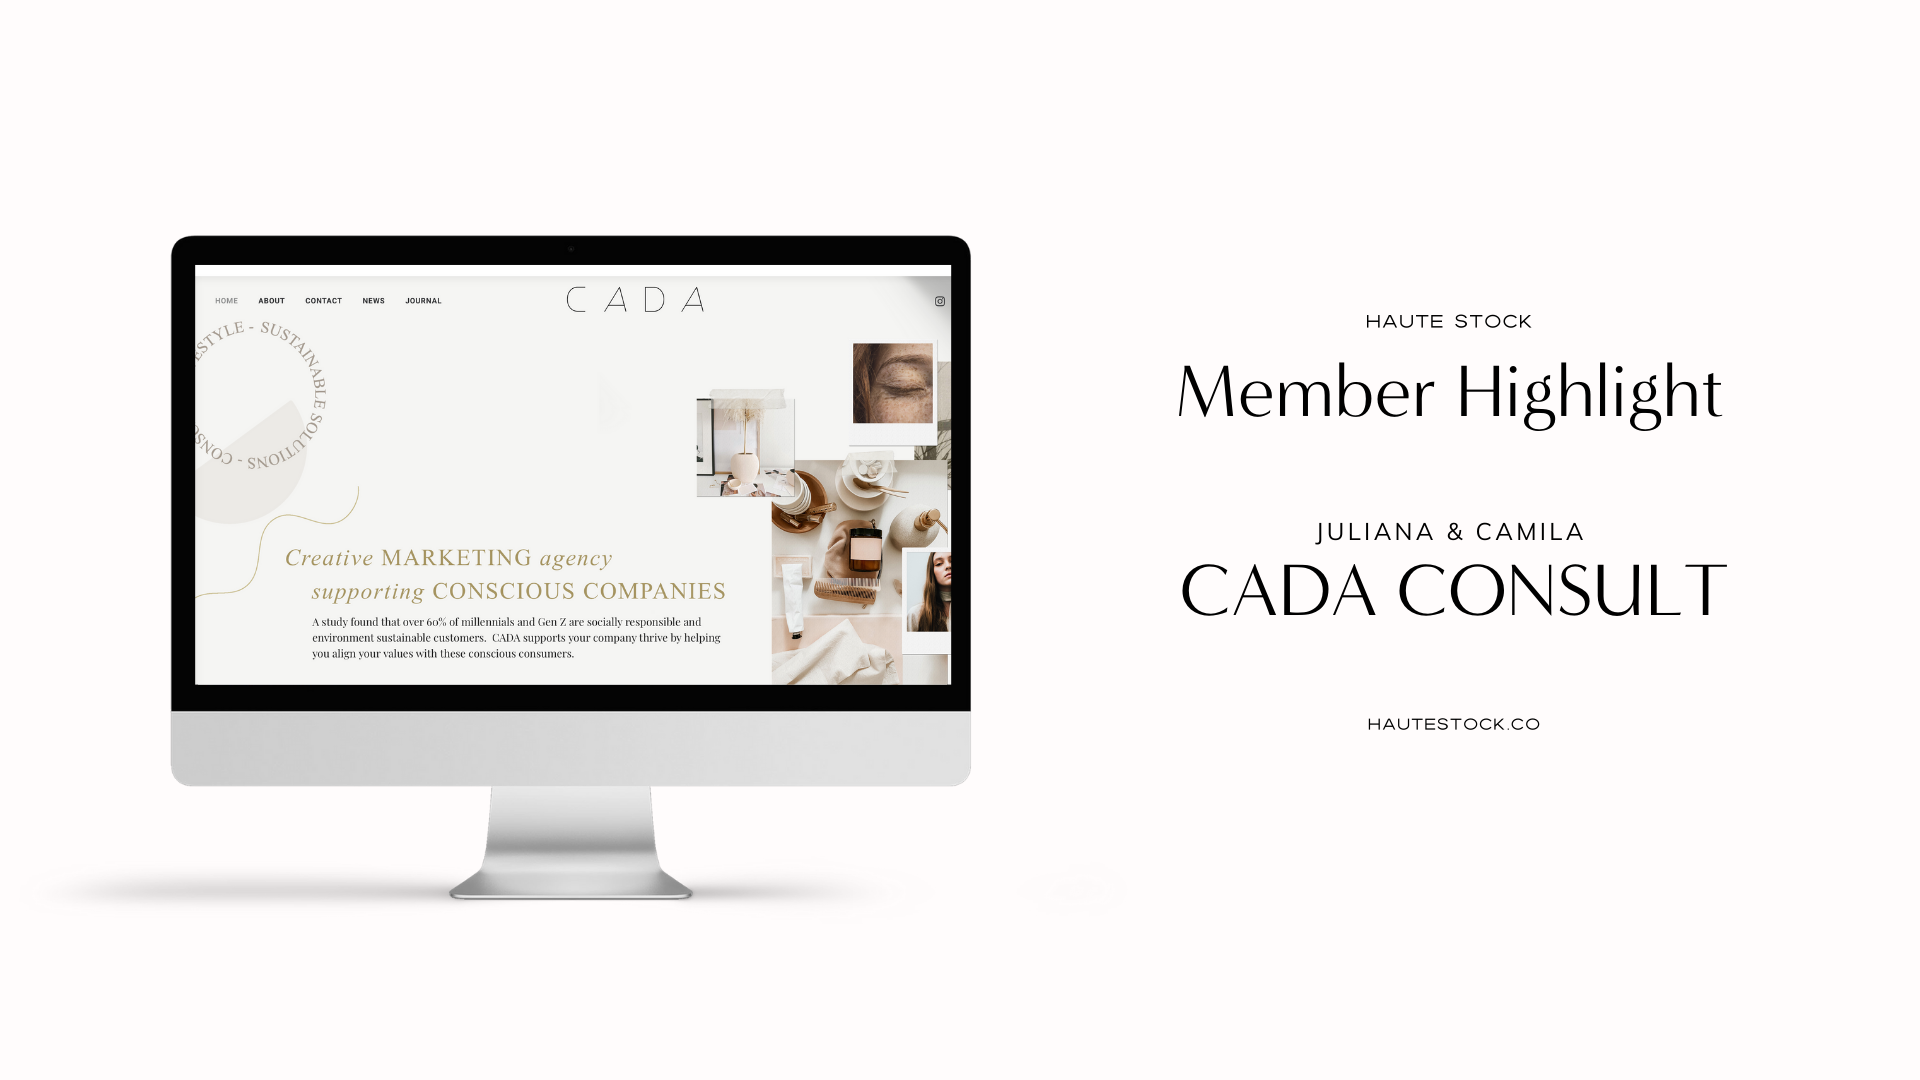 Meet Juliana & Camila, co-founders of Cada Consult, in this Haute Stock Member Feature showcasing their use of Haute Stock images for their brand and the story of how they started their business!